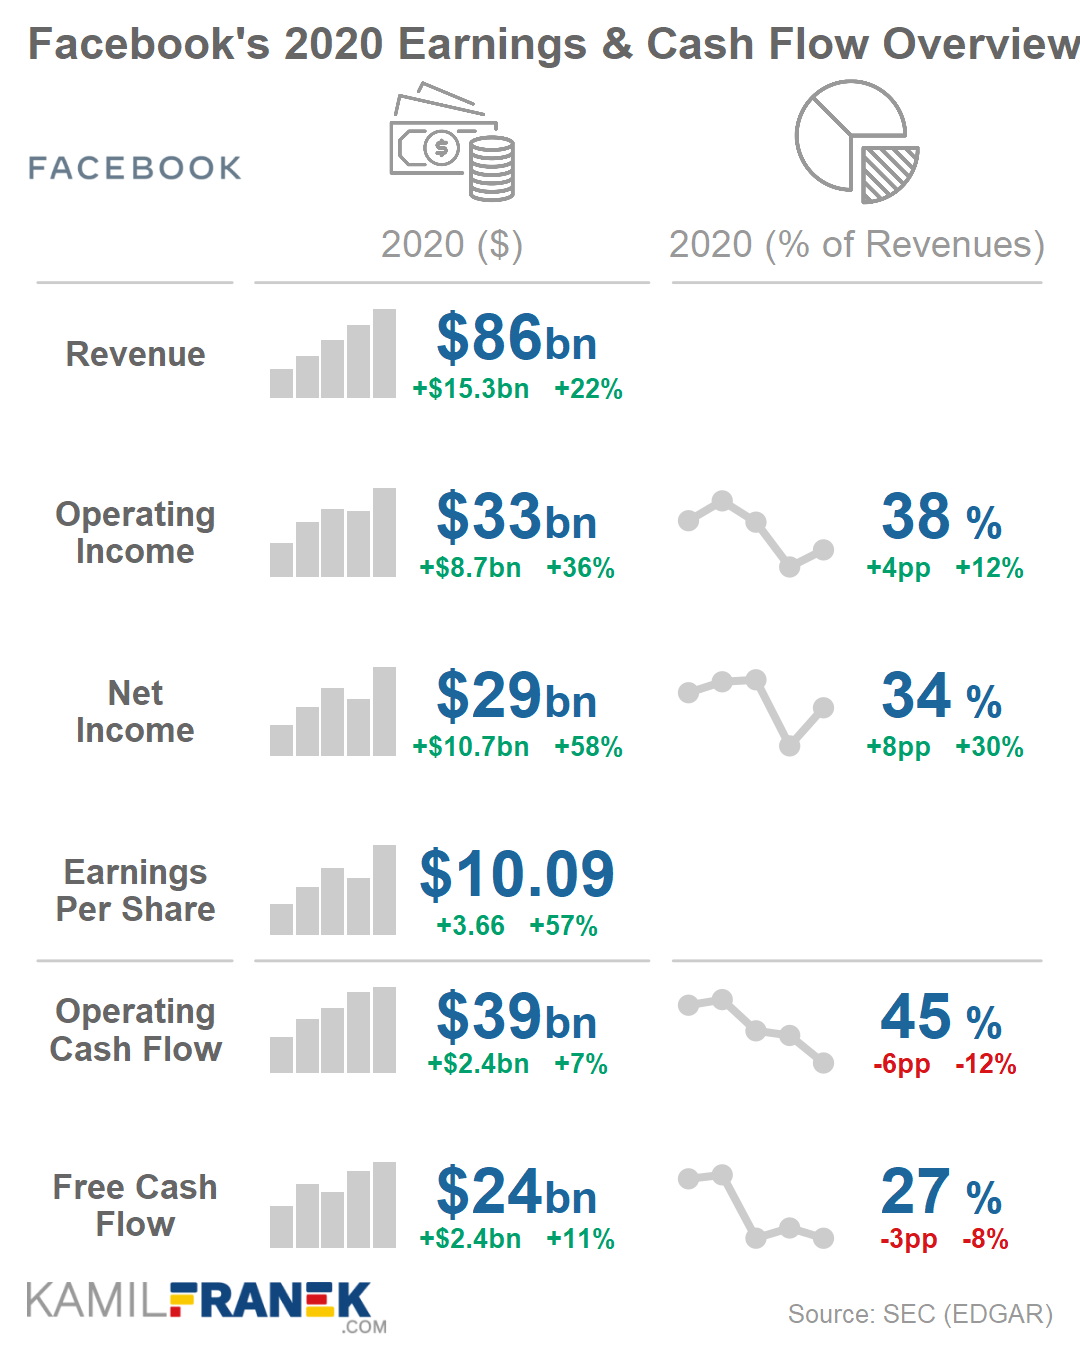 Facebook's key income statement and cash flow metrics summary overview 2020